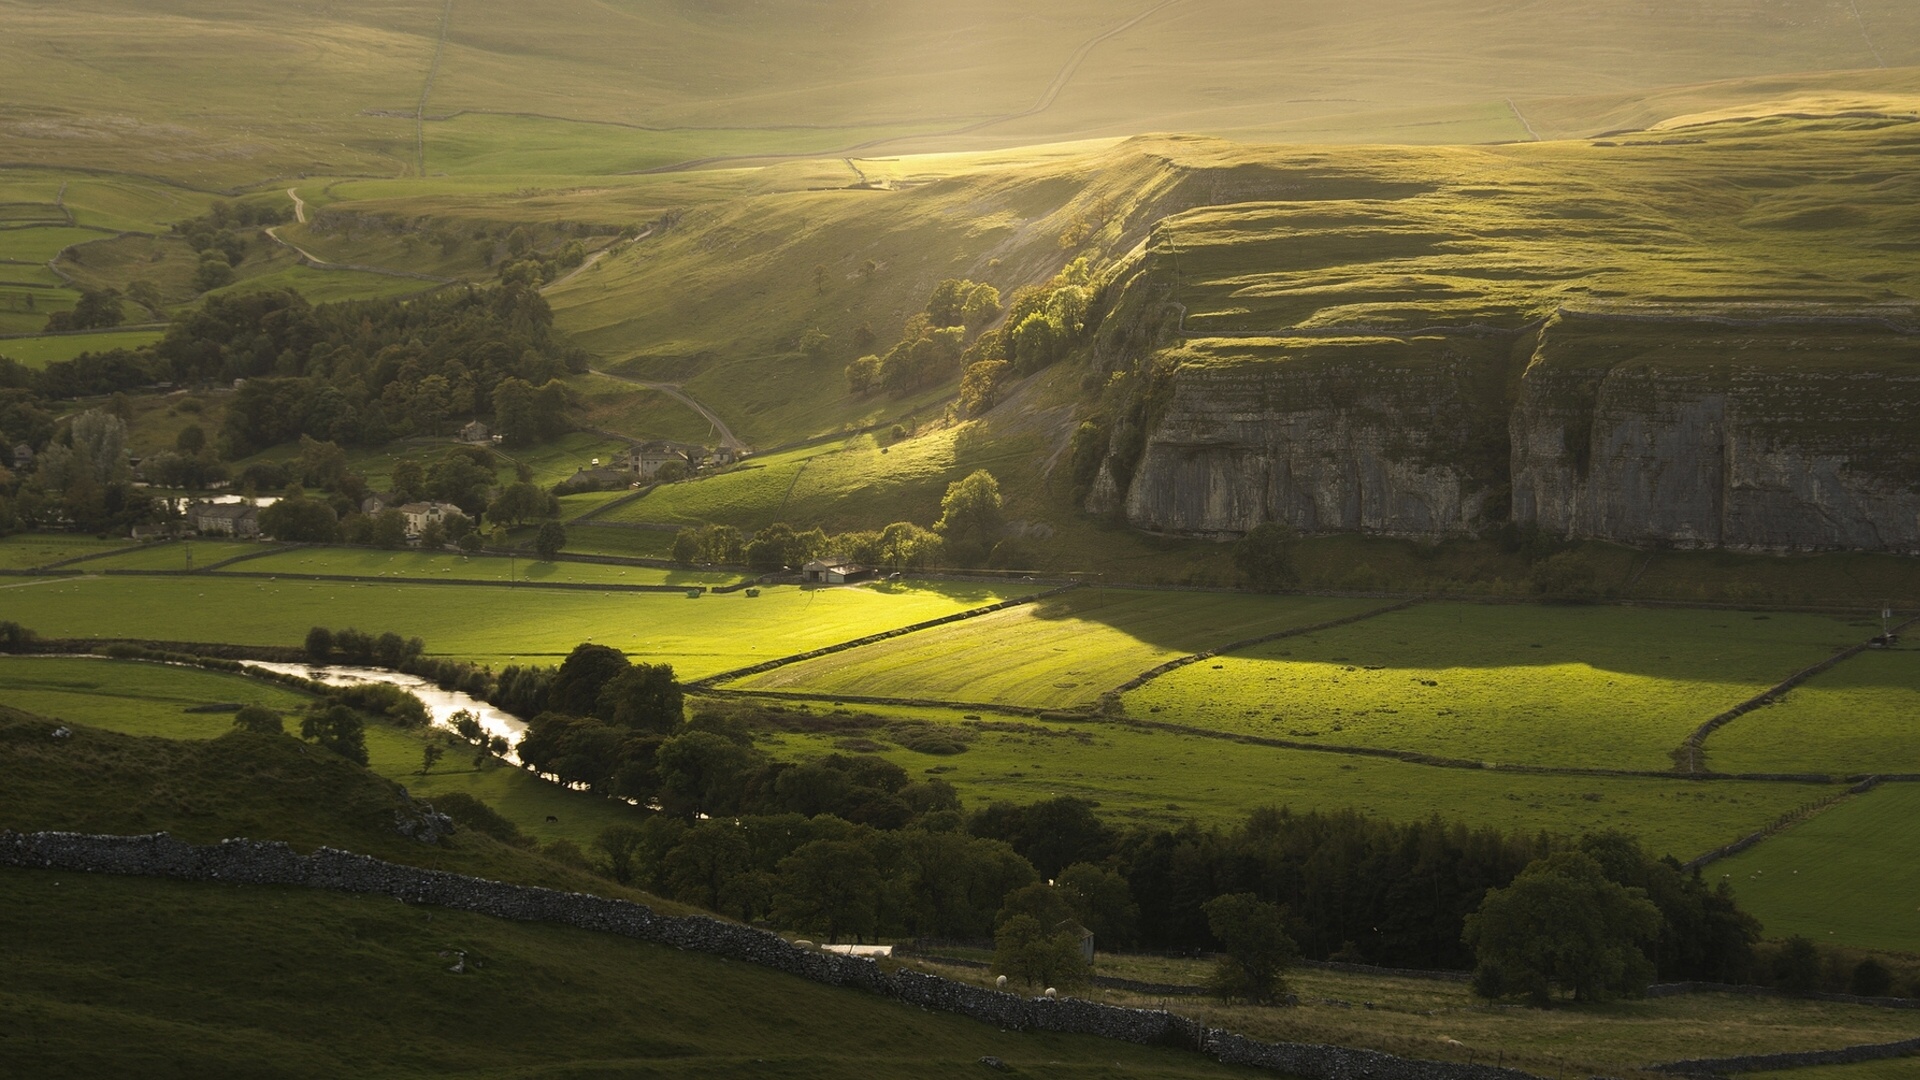 north, Yorkshire, England, Rock, River, View, Field, Autumn Wallpaper